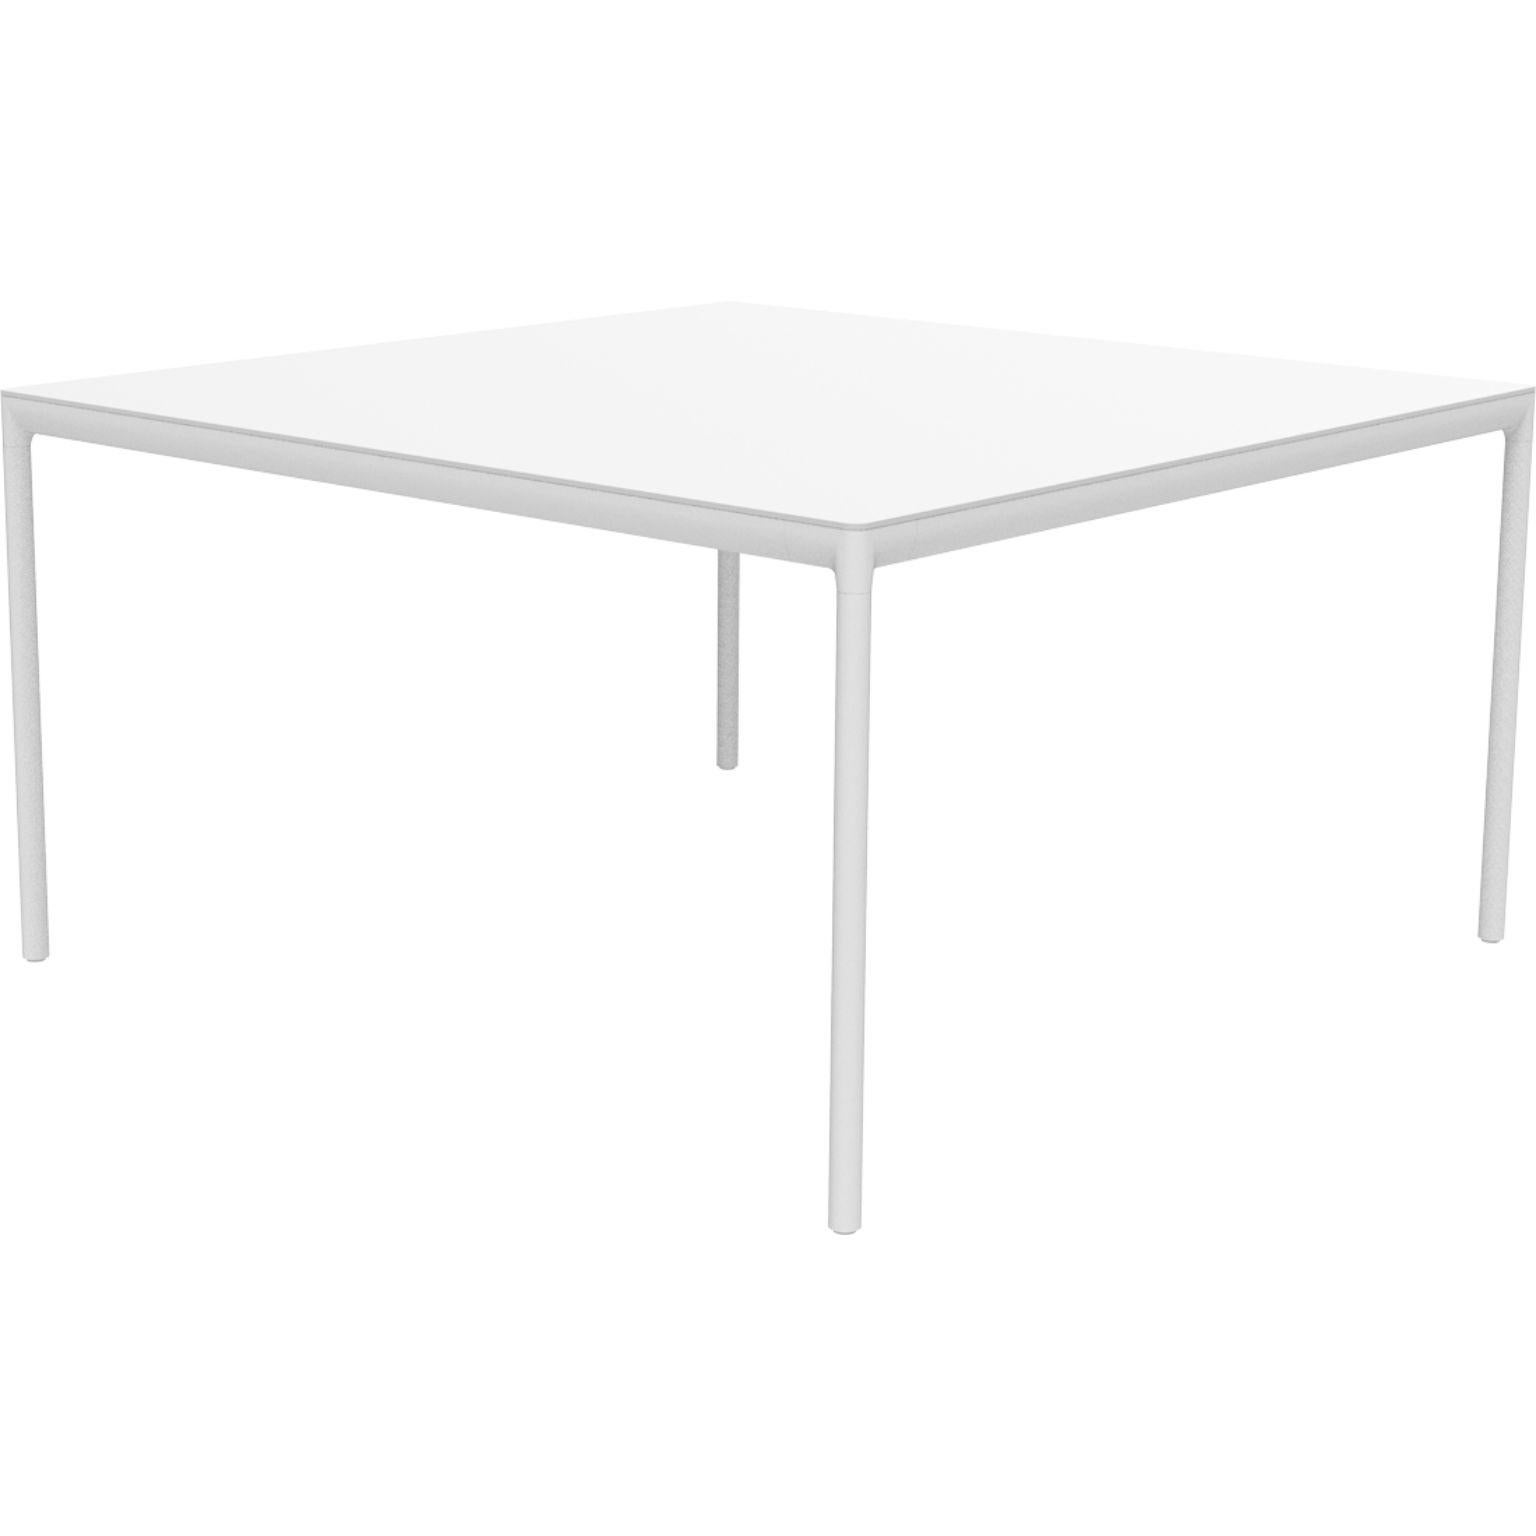 Ribbons White 138 Coffee Table by MOWEE
Dimensions: D138 x W138 x H75 cm.
Material: Aluminum and HPL top.
Weight: 23 kg.
Also available in different colors and finishes. (HPL Black Edge or Neolith top). 

An unmistakable collection for its